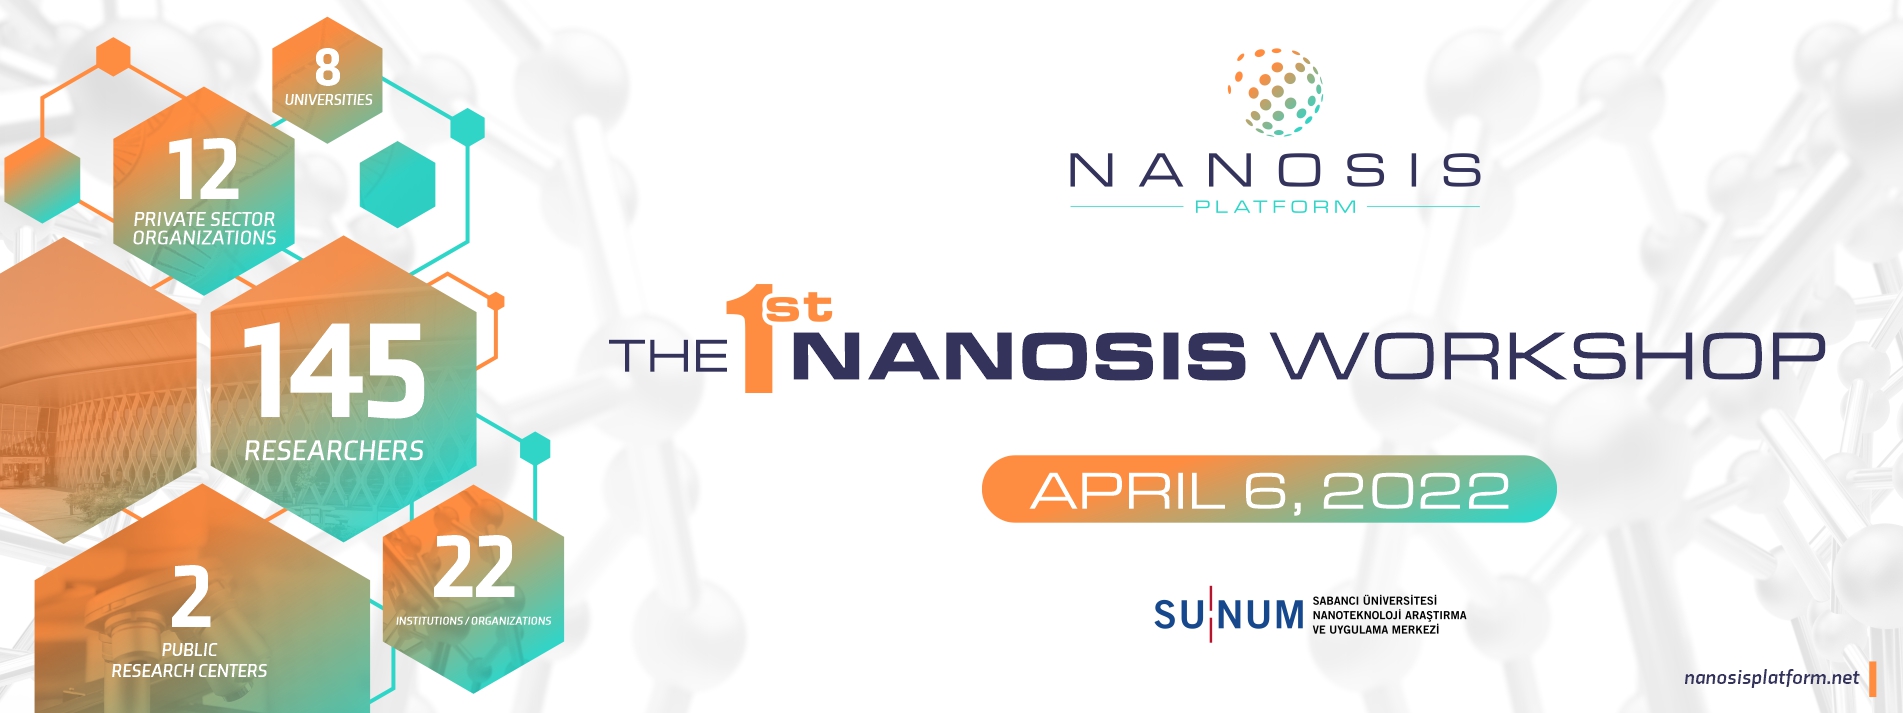 The 1st NANOSİS Workshop will be held on April 6